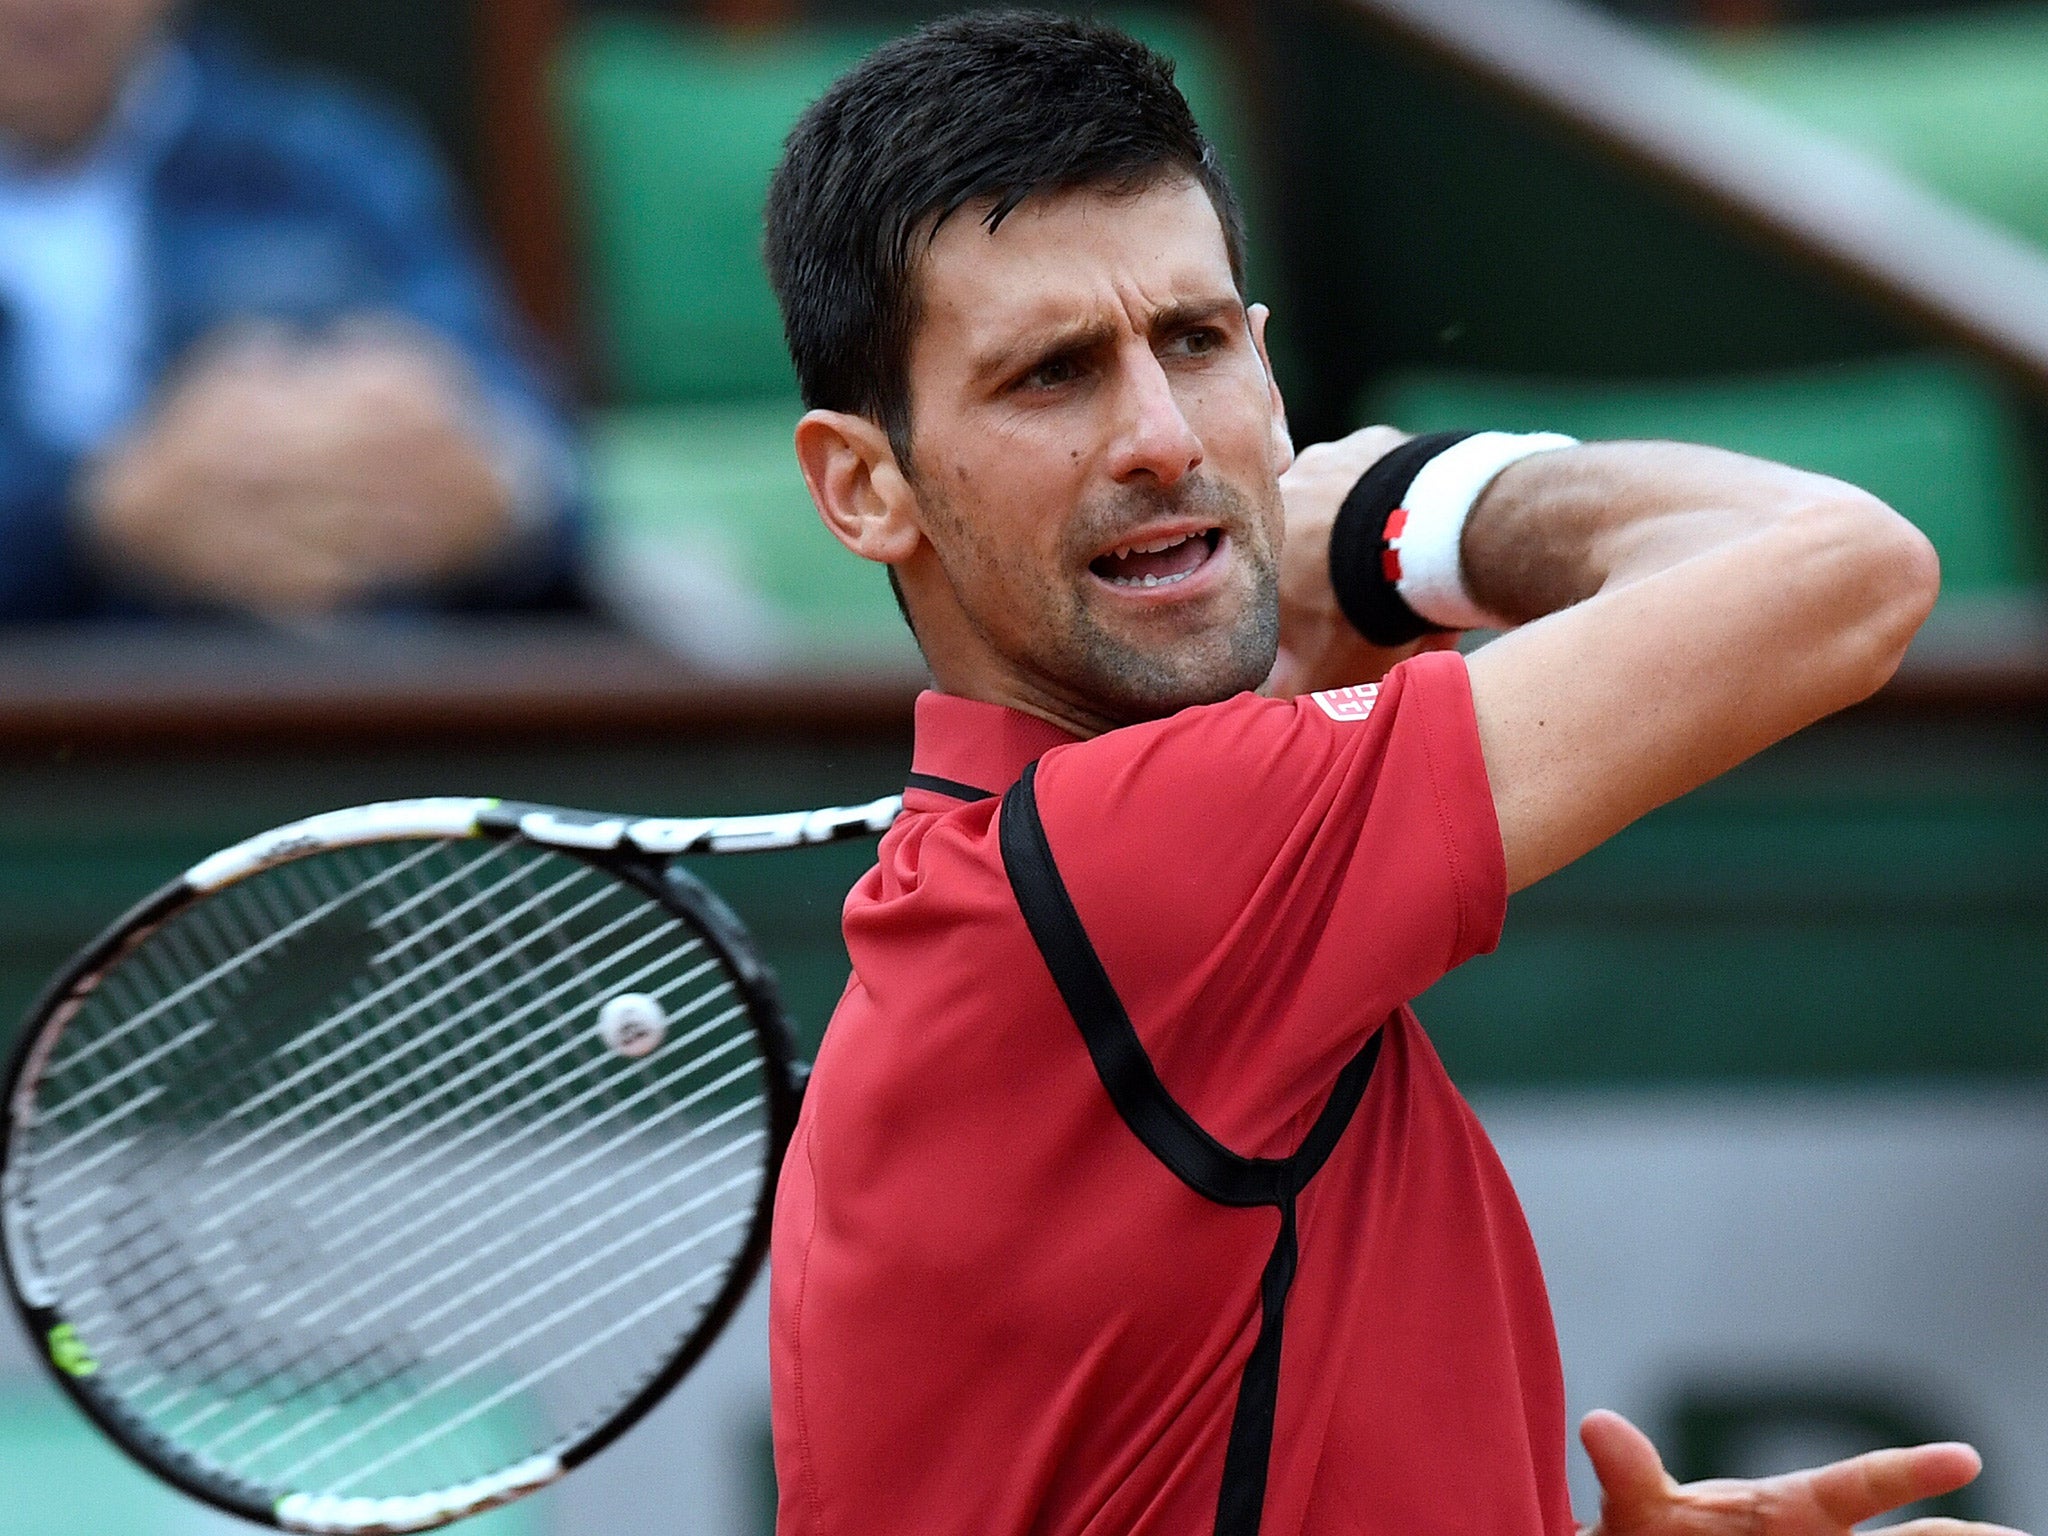 Novak Djokovic has expressed concern at going to Rio for the Olympics due to the Zika virus